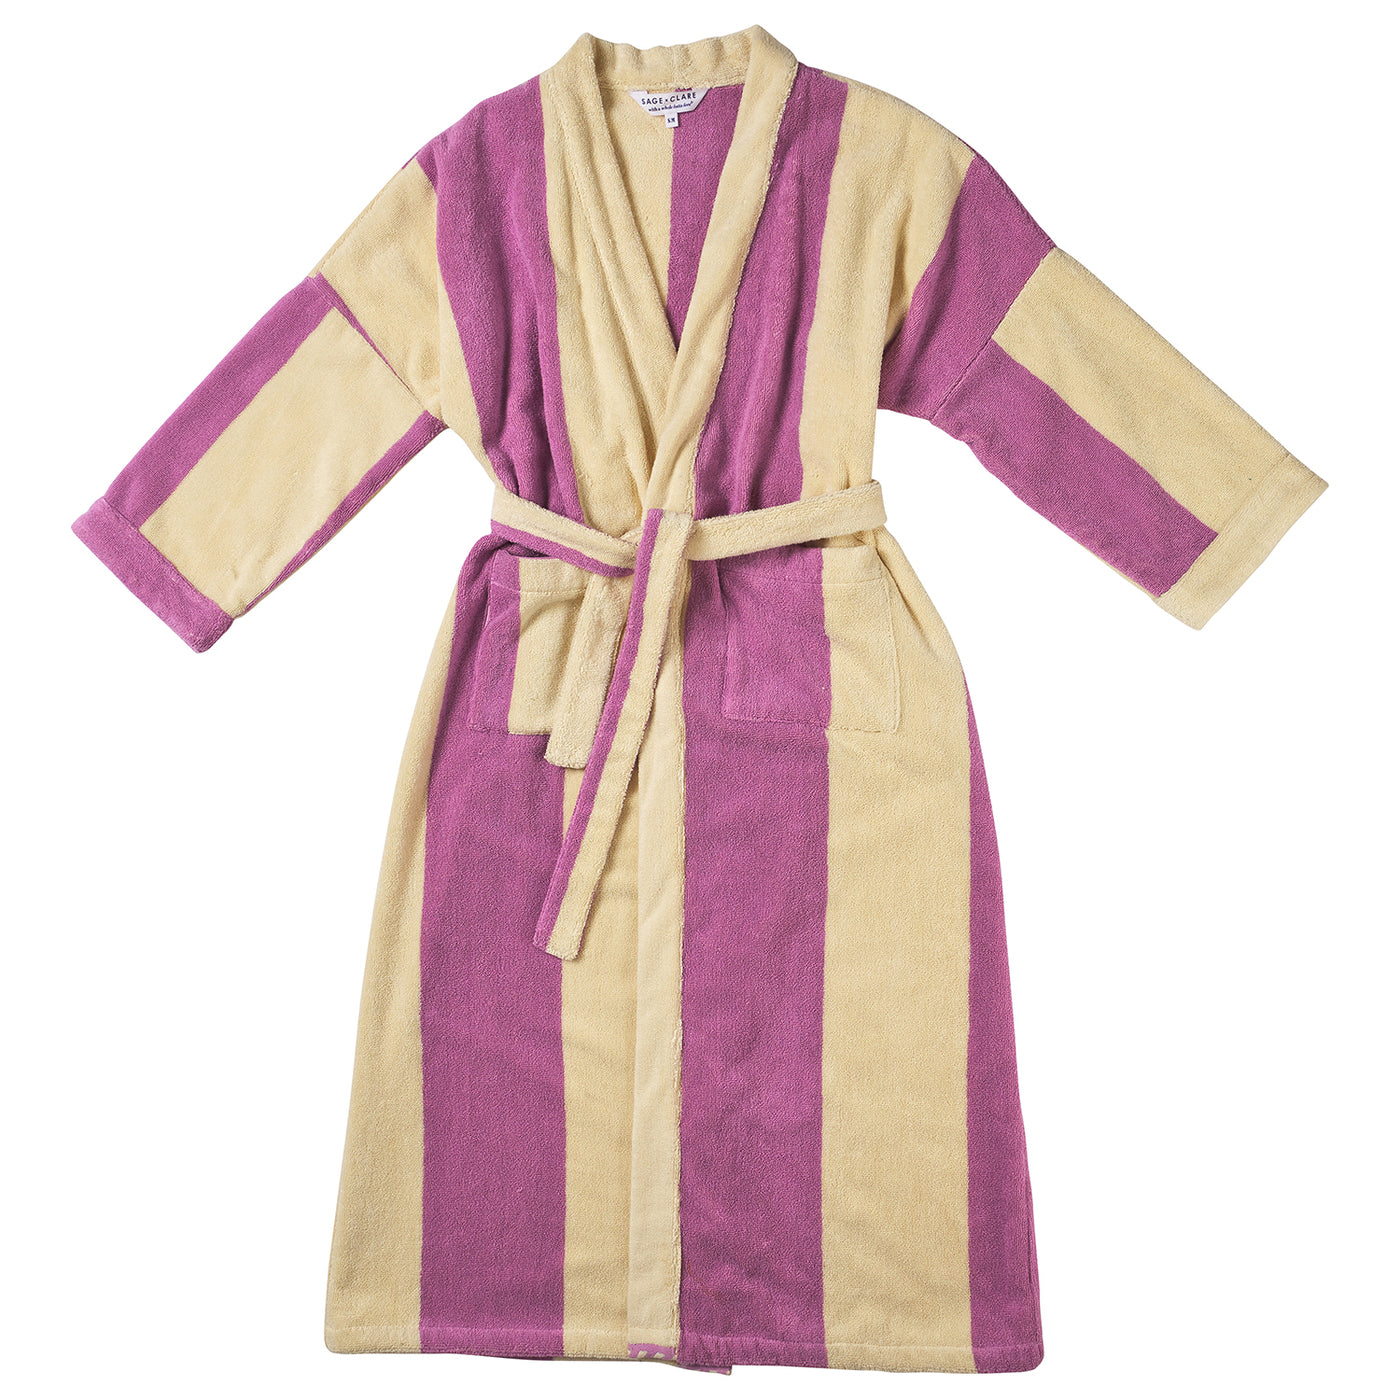 Halifax Towelling Robe - Orchid XS / S